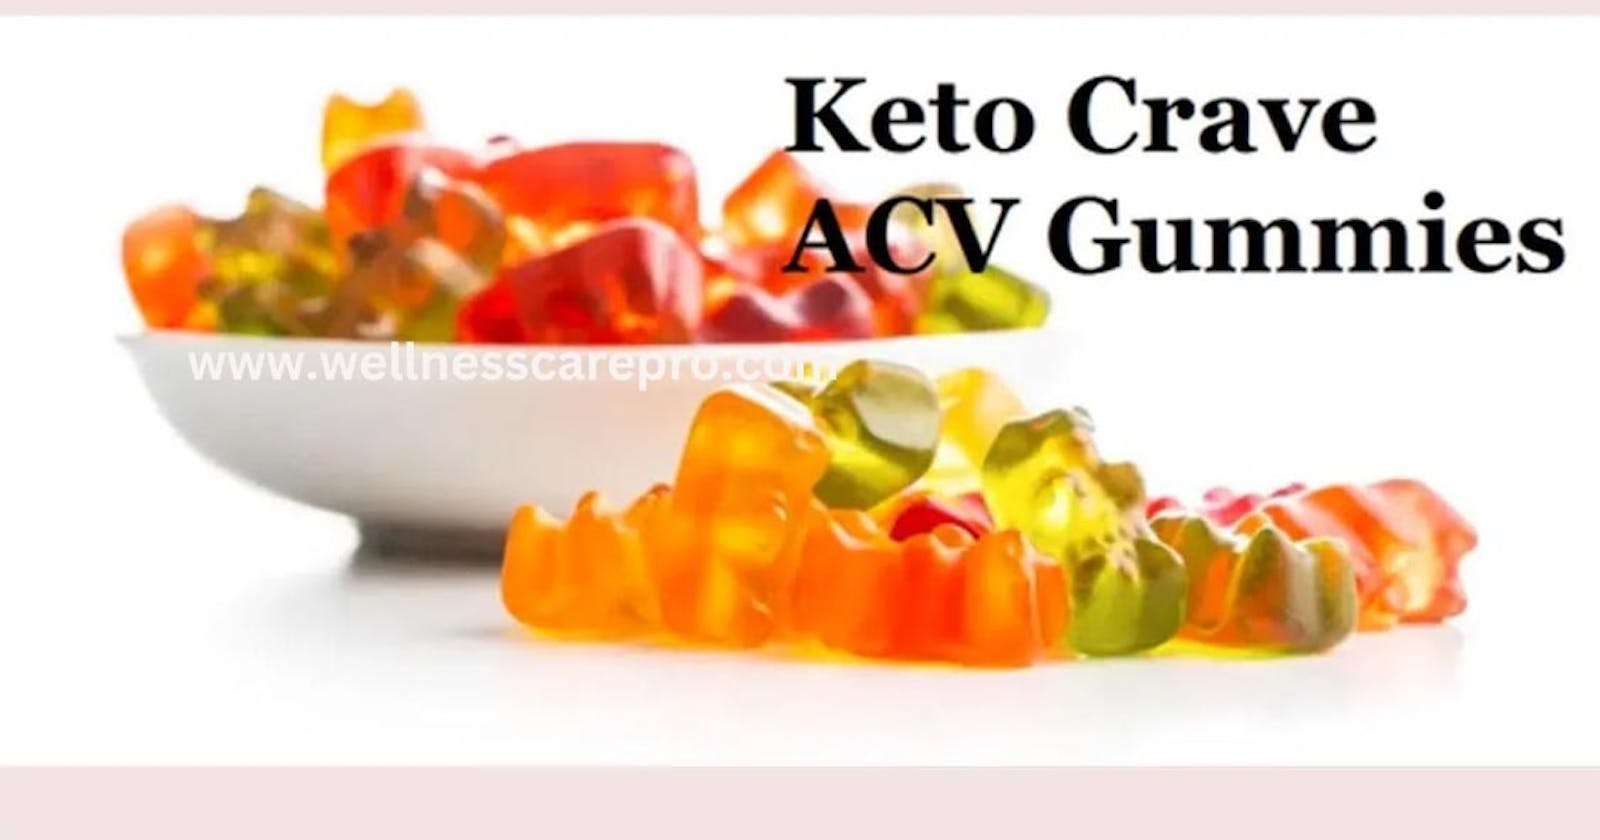 Keto Crave ACV Gummies Reviews, Weight Loss Supplements, 100% Best Formula, Ingredients & Order Now?